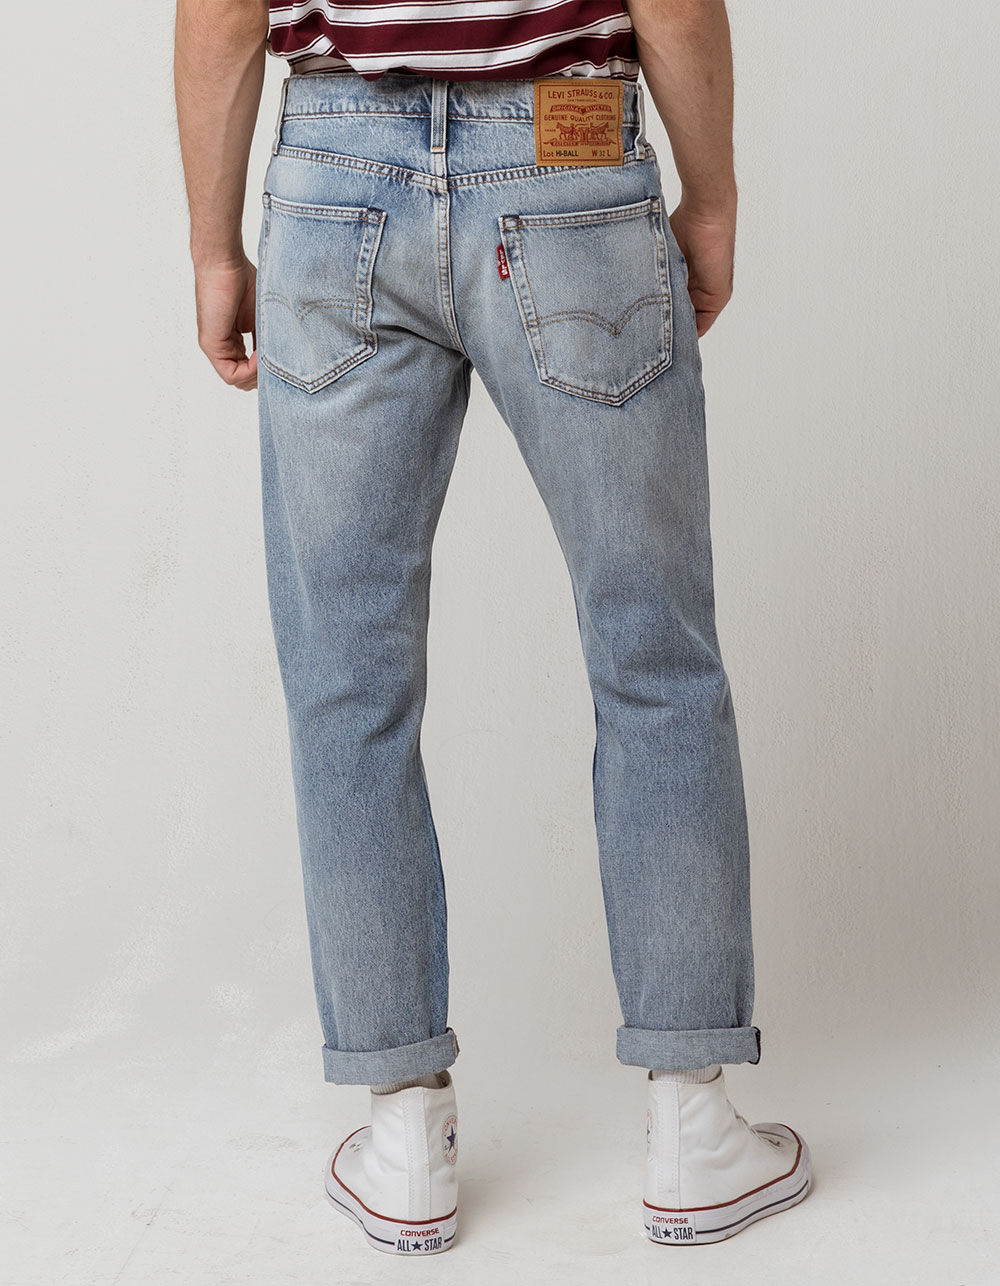 LEVI'S Hi-ball Roll Swing Man Mens Jeans image number 2